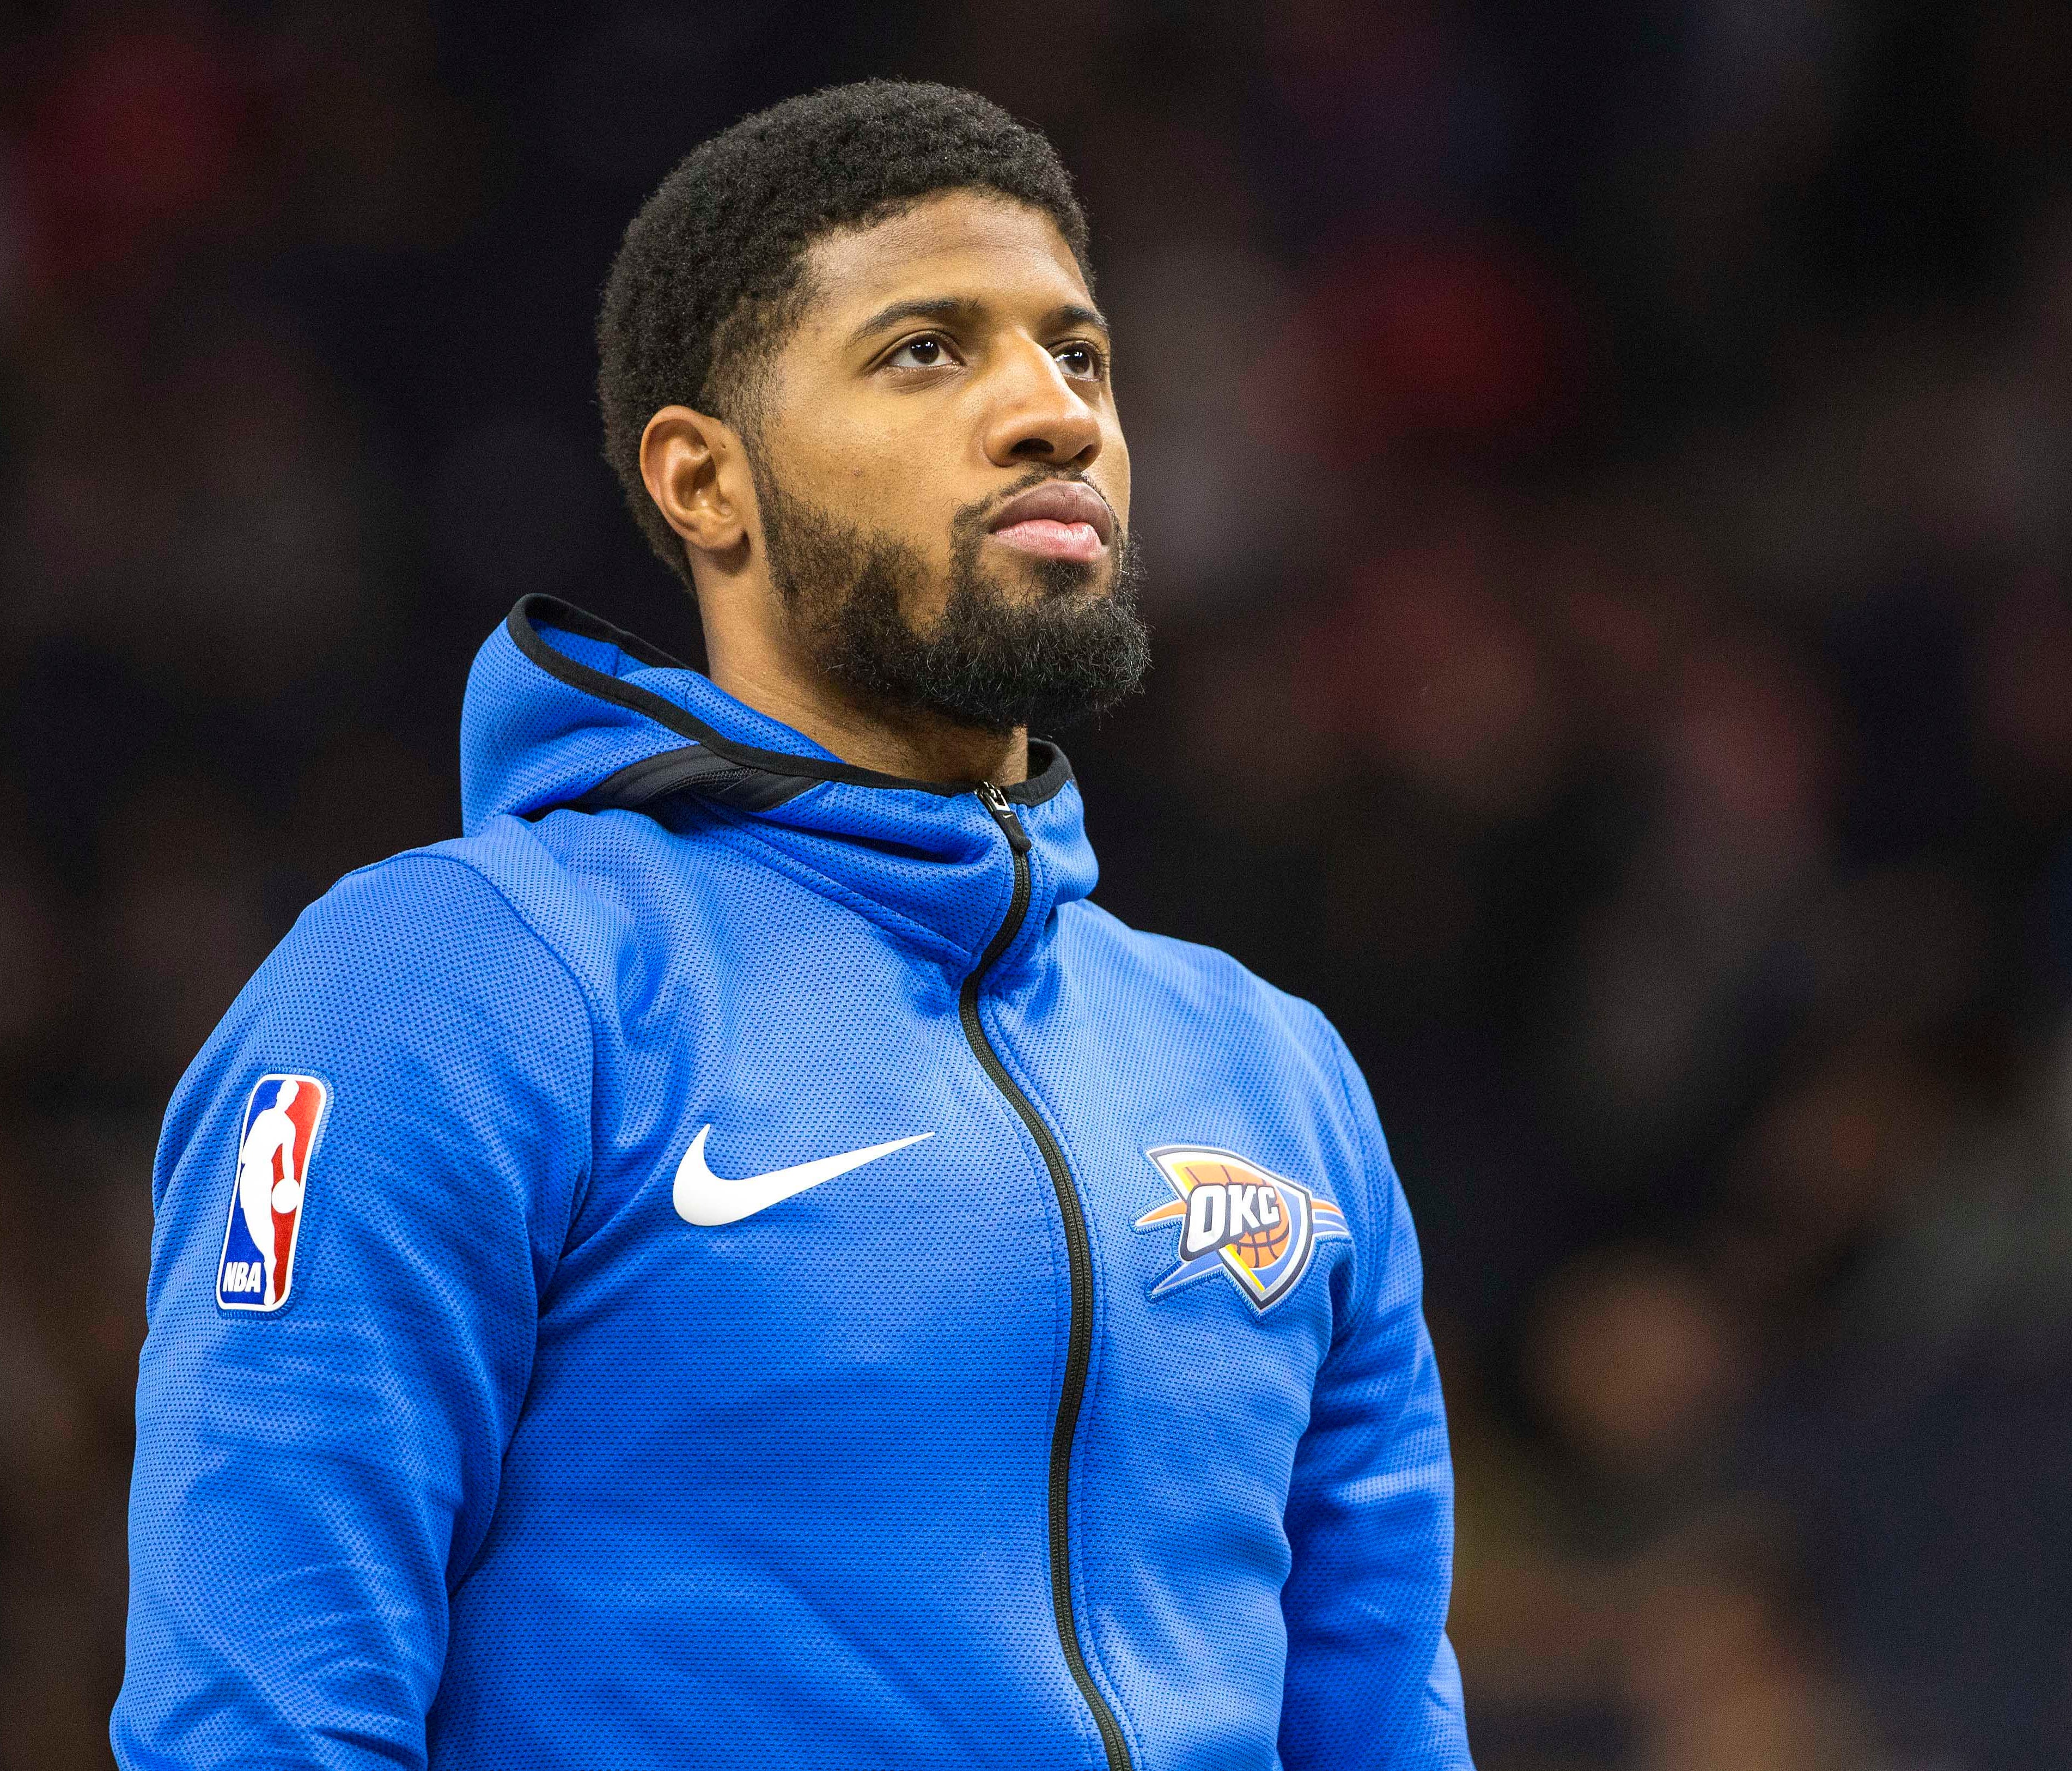 Oklahoma City Thunder forward Paul George (13) looks on before the game against the Minnesota Timberwolves at Target Center.